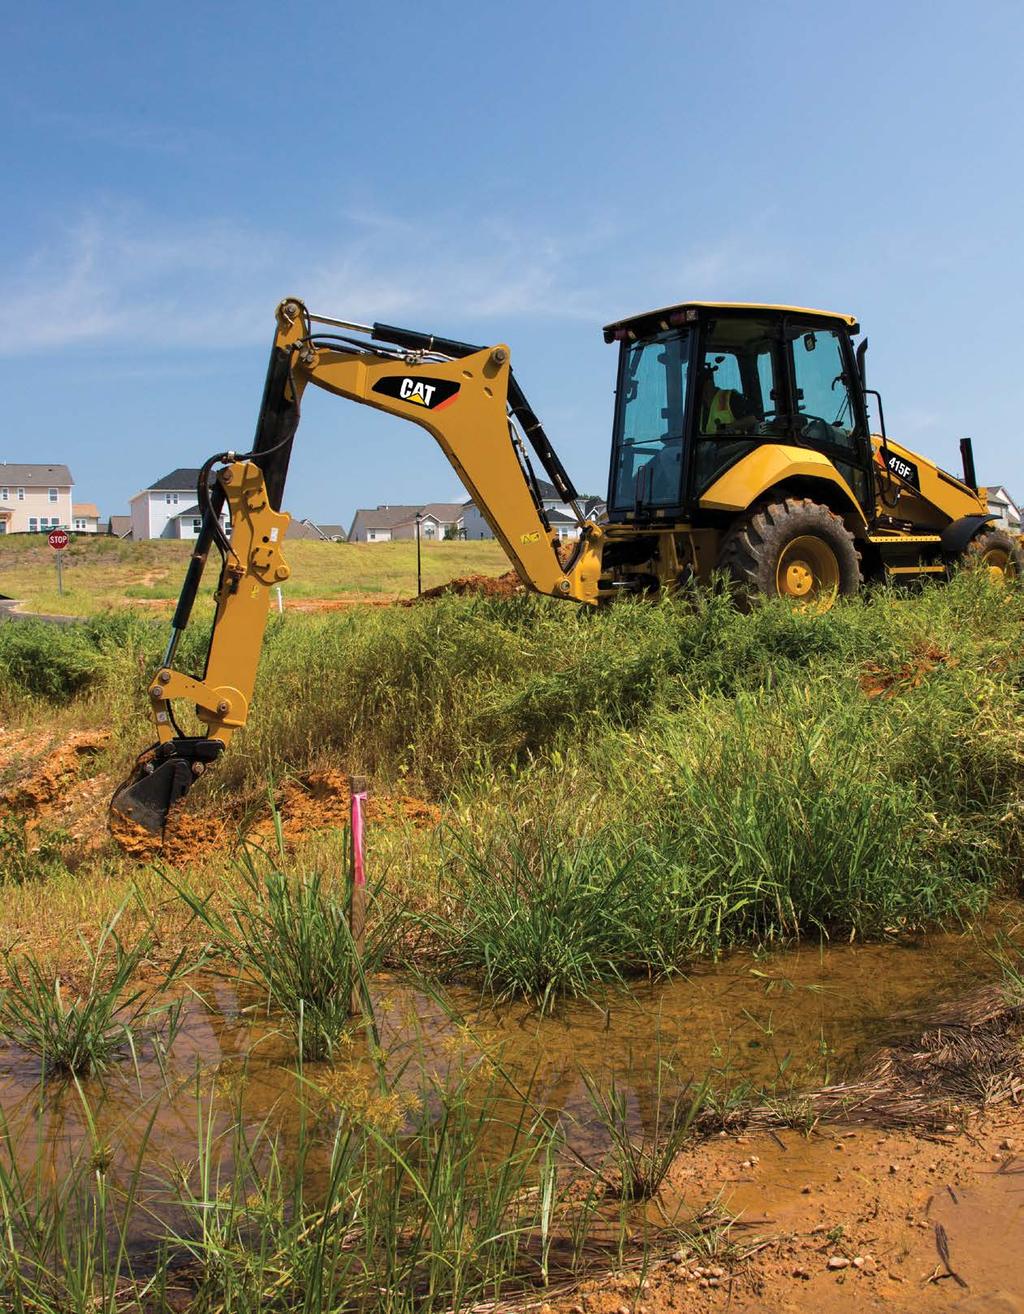 Cat Backhoe Loaders provide superior digging, trenching, backfilling and material handling capability for productive performance in a variety of